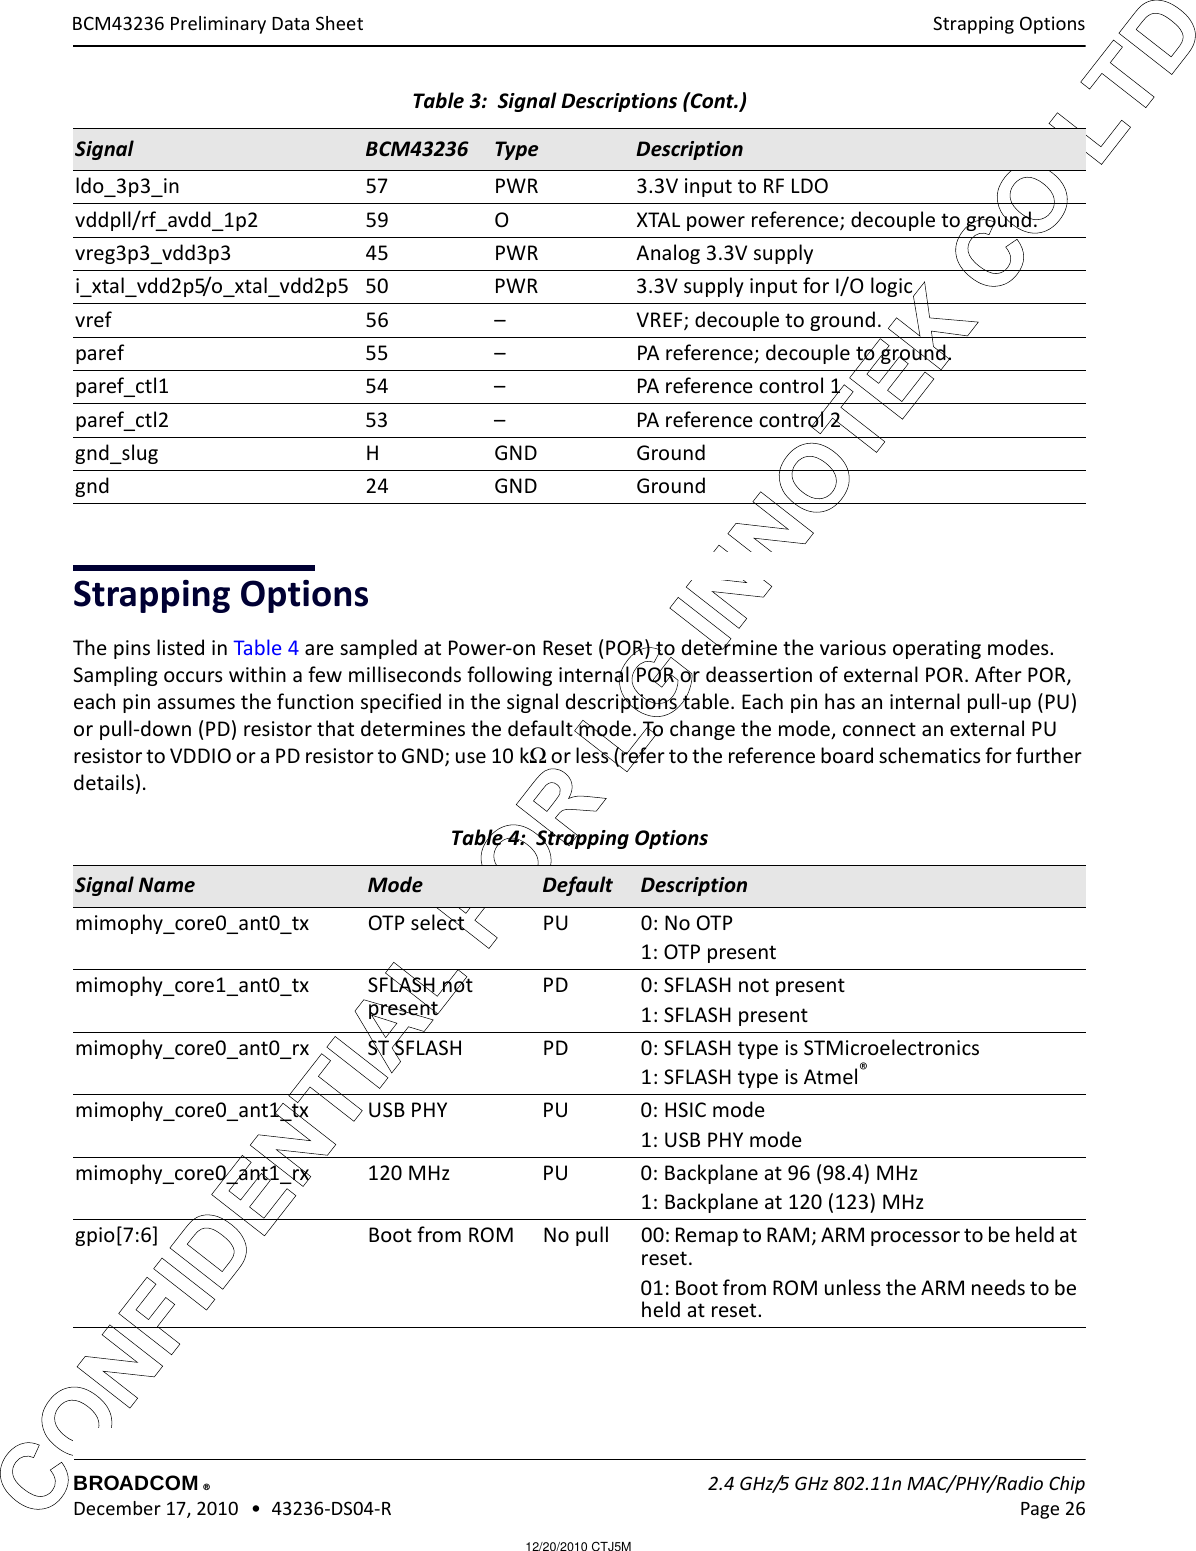 12/20/2010 CTJ5MCONFIDENTIAL FOR LG INNOTEK CO LTD Strapping OptionsBROADCOM    2.4 GHz/5 GHz 802.11n MAC/PHY/Radio Chip December 17, 2010   •  43236-DS04-R Page 26®BCM43236 Preliminary Data SheetStrapping OptionsThe pins listed in Table 4 are sampled at Power-on Reset (POR) to determine the various operating modes. Sampling occurs within a few milliseconds following internal POR or deassertion of external POR. After POR, each pin assumes the function specified in the signal descriptions table. Each pin has an internal pull-up (PU) or pull-down (PD) resistor that determines the default mode. To change the mode, connect an external PU resistor to VDDIO or a PD resistor to GND; use 10 kΩ or less (refer to the reference board schematics for further details).ldo_3p3_in 57 PWR 3.3V input to RF LDOvddpll/rf_avdd_1p2 59 O XTAL power reference; decouple to ground.vreg3p3_vdd3p3 45 PWR Analog 3.3V supplyi_xtal_vdd2p5/o_xtal_vdd2p5 50 PWR 3.3V supply input for I/O logicvref 56 – VREF; decouple to ground.paref 55 – PA reference; decouple to ground.paref_ctl1 54 – PA reference control 1paref_ctl2 53 – PA reference control 2gnd_slug H GND Groundgnd 24 GND GroundTable 4:  Strapping Options Signal Name  Mode  Default  Description mimophy_core0_ant0_tx OTP select PU 0: No OTP1: OTP presentmimophy_core1_ant0_tx SFLASH not presentPD 0: SFLASH not present1: SFLASH presentmimophy_core0_ant0_rx ST SFLASH PD 0: SFLASH type is STMicroelectronics1: SFLASH type is Atmel®mimophy_core0_ant1_tx USB PHY PU 0: HSIC mode1: USB PHY modemimophy_core0_ant1_rx 120 MHz PU 0: Backplane at 96 (98.4) MHz1: Backplane at 120 (123) MHzgpio[7:6] Boot from ROM No pull 00: Remap to RAM; ARM processor to be held at reset.01: Boot from ROM unless the ARM needs to be held at reset.Table 3:  Signal Descriptions (Cont.)Signal BCM43236 Type Description